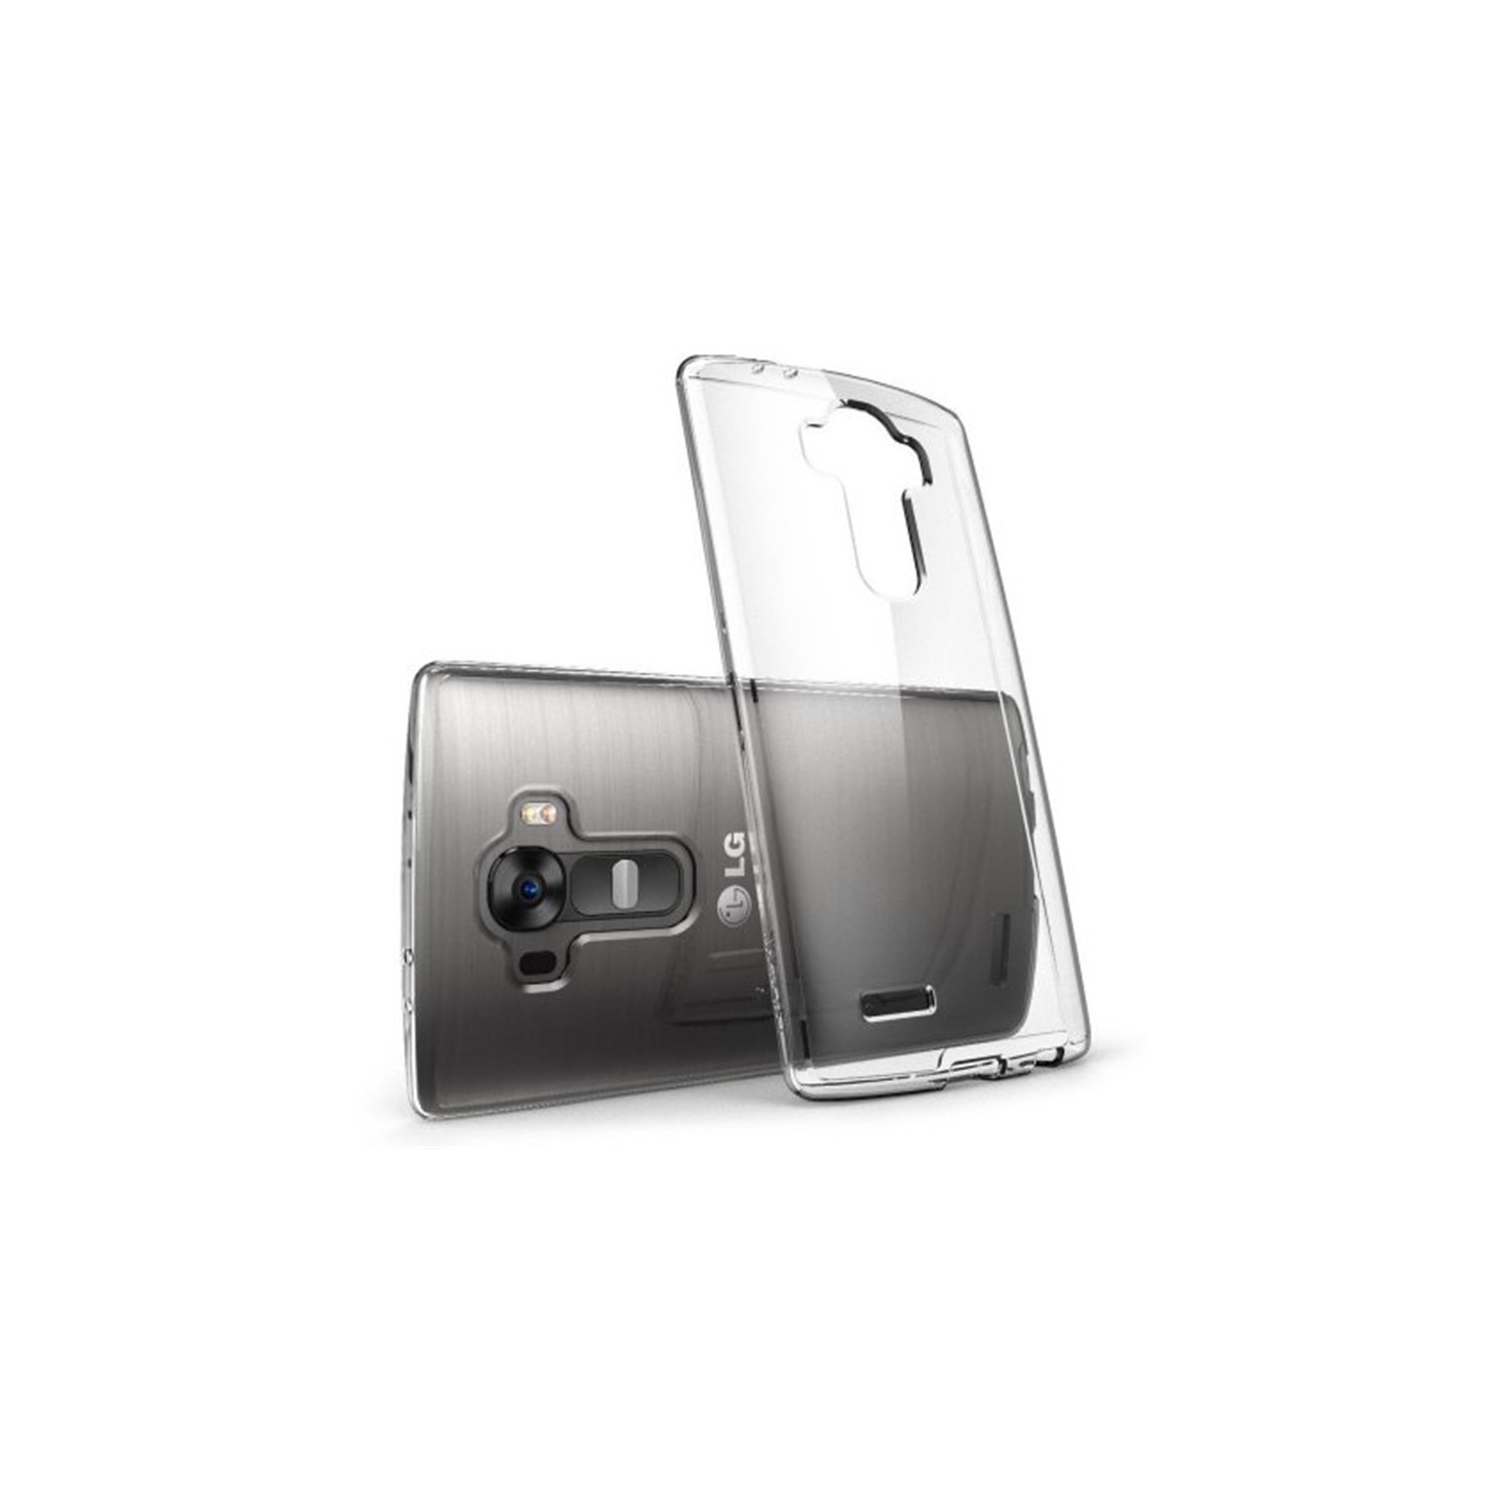 【CSmart】 Ultra Thin Soft TPU Silicone Jelly Bumper Back Cover Case for LG G4, Transparent Clear